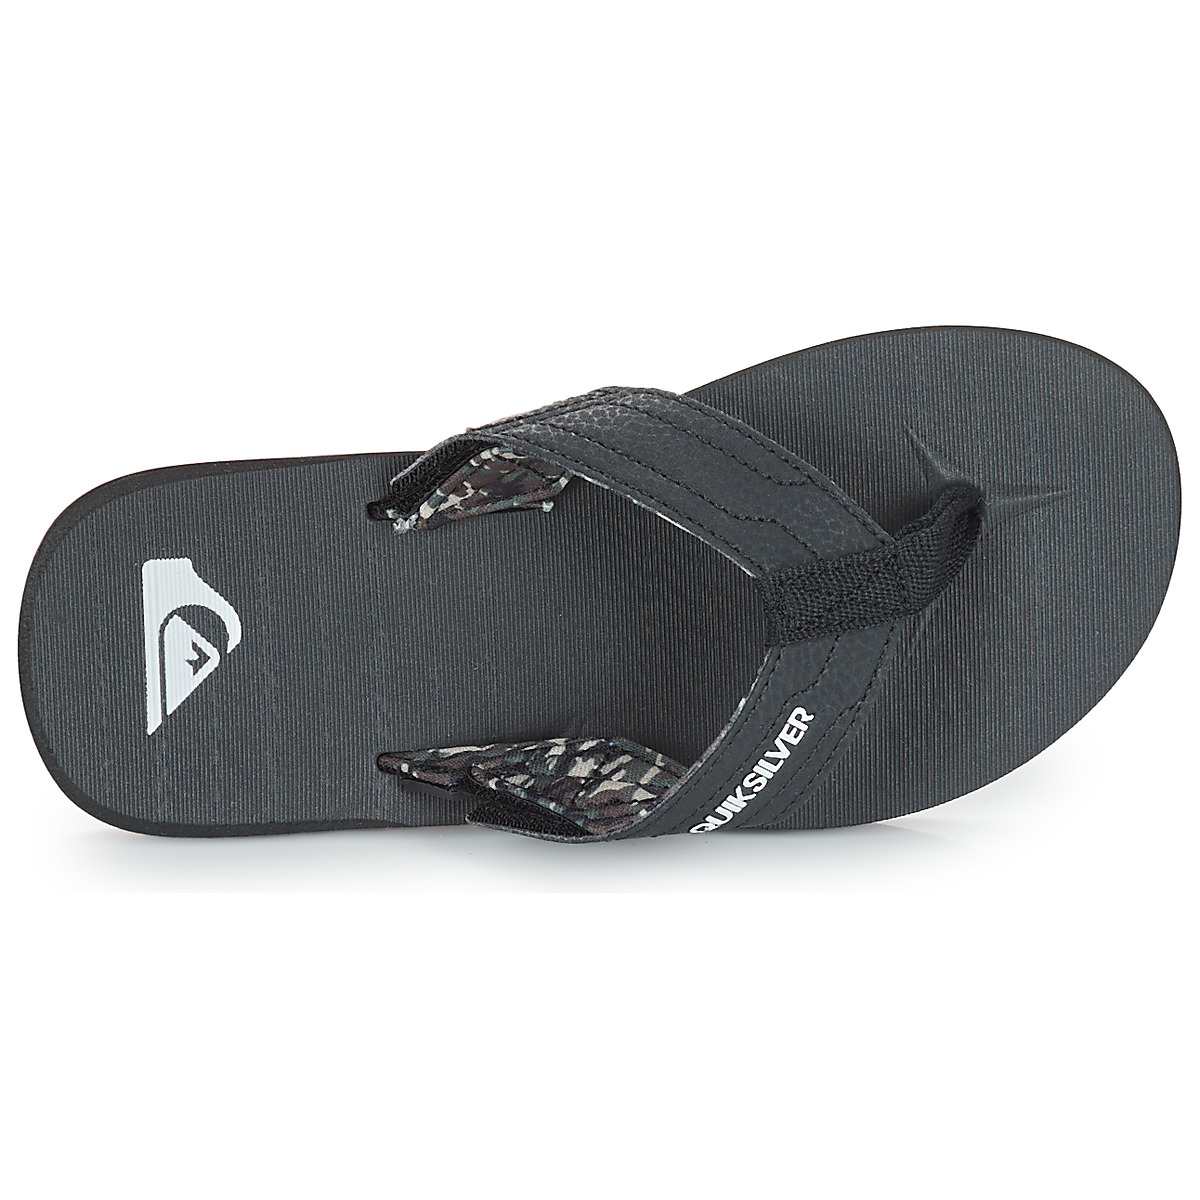 Quiksilver Noir CARVER SWITCH YOUTH KMAWcJr4